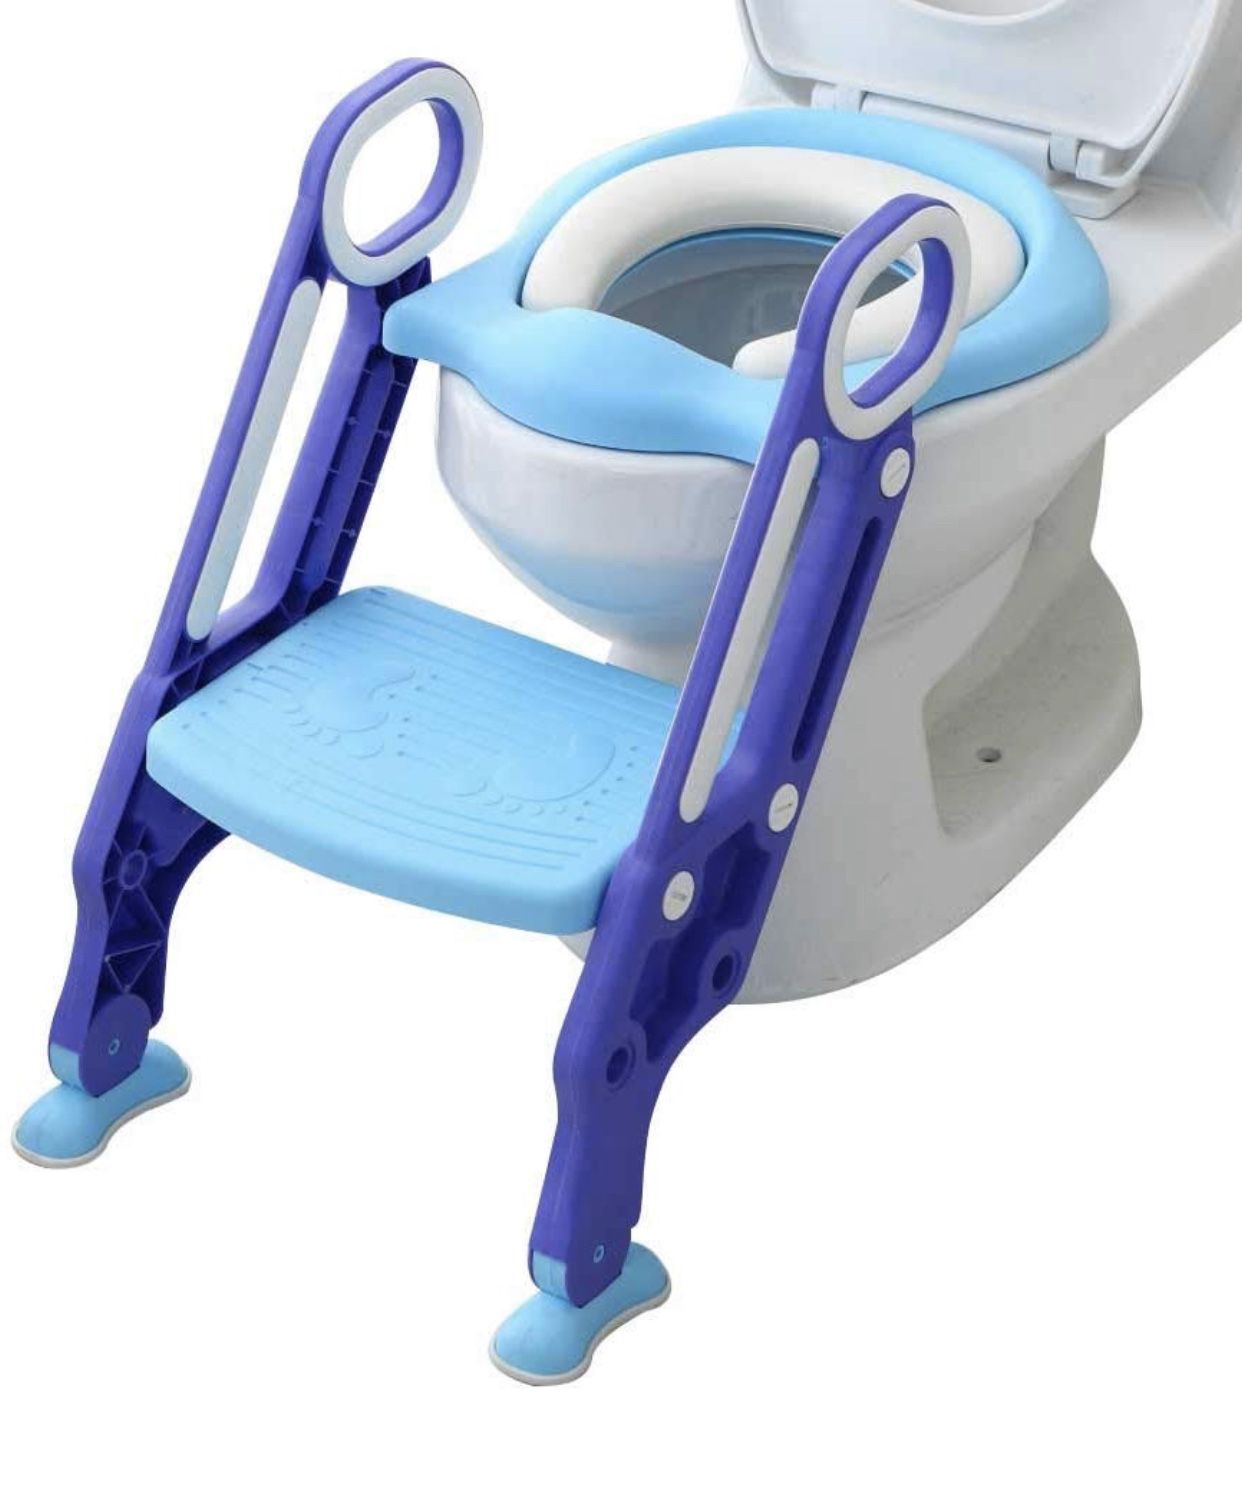 Mangohood Potty Training Toilet Seat with Step Stool Ladder for Boy and Girl Baby Toddler Kid Children’s Toilet Training Seat Chair